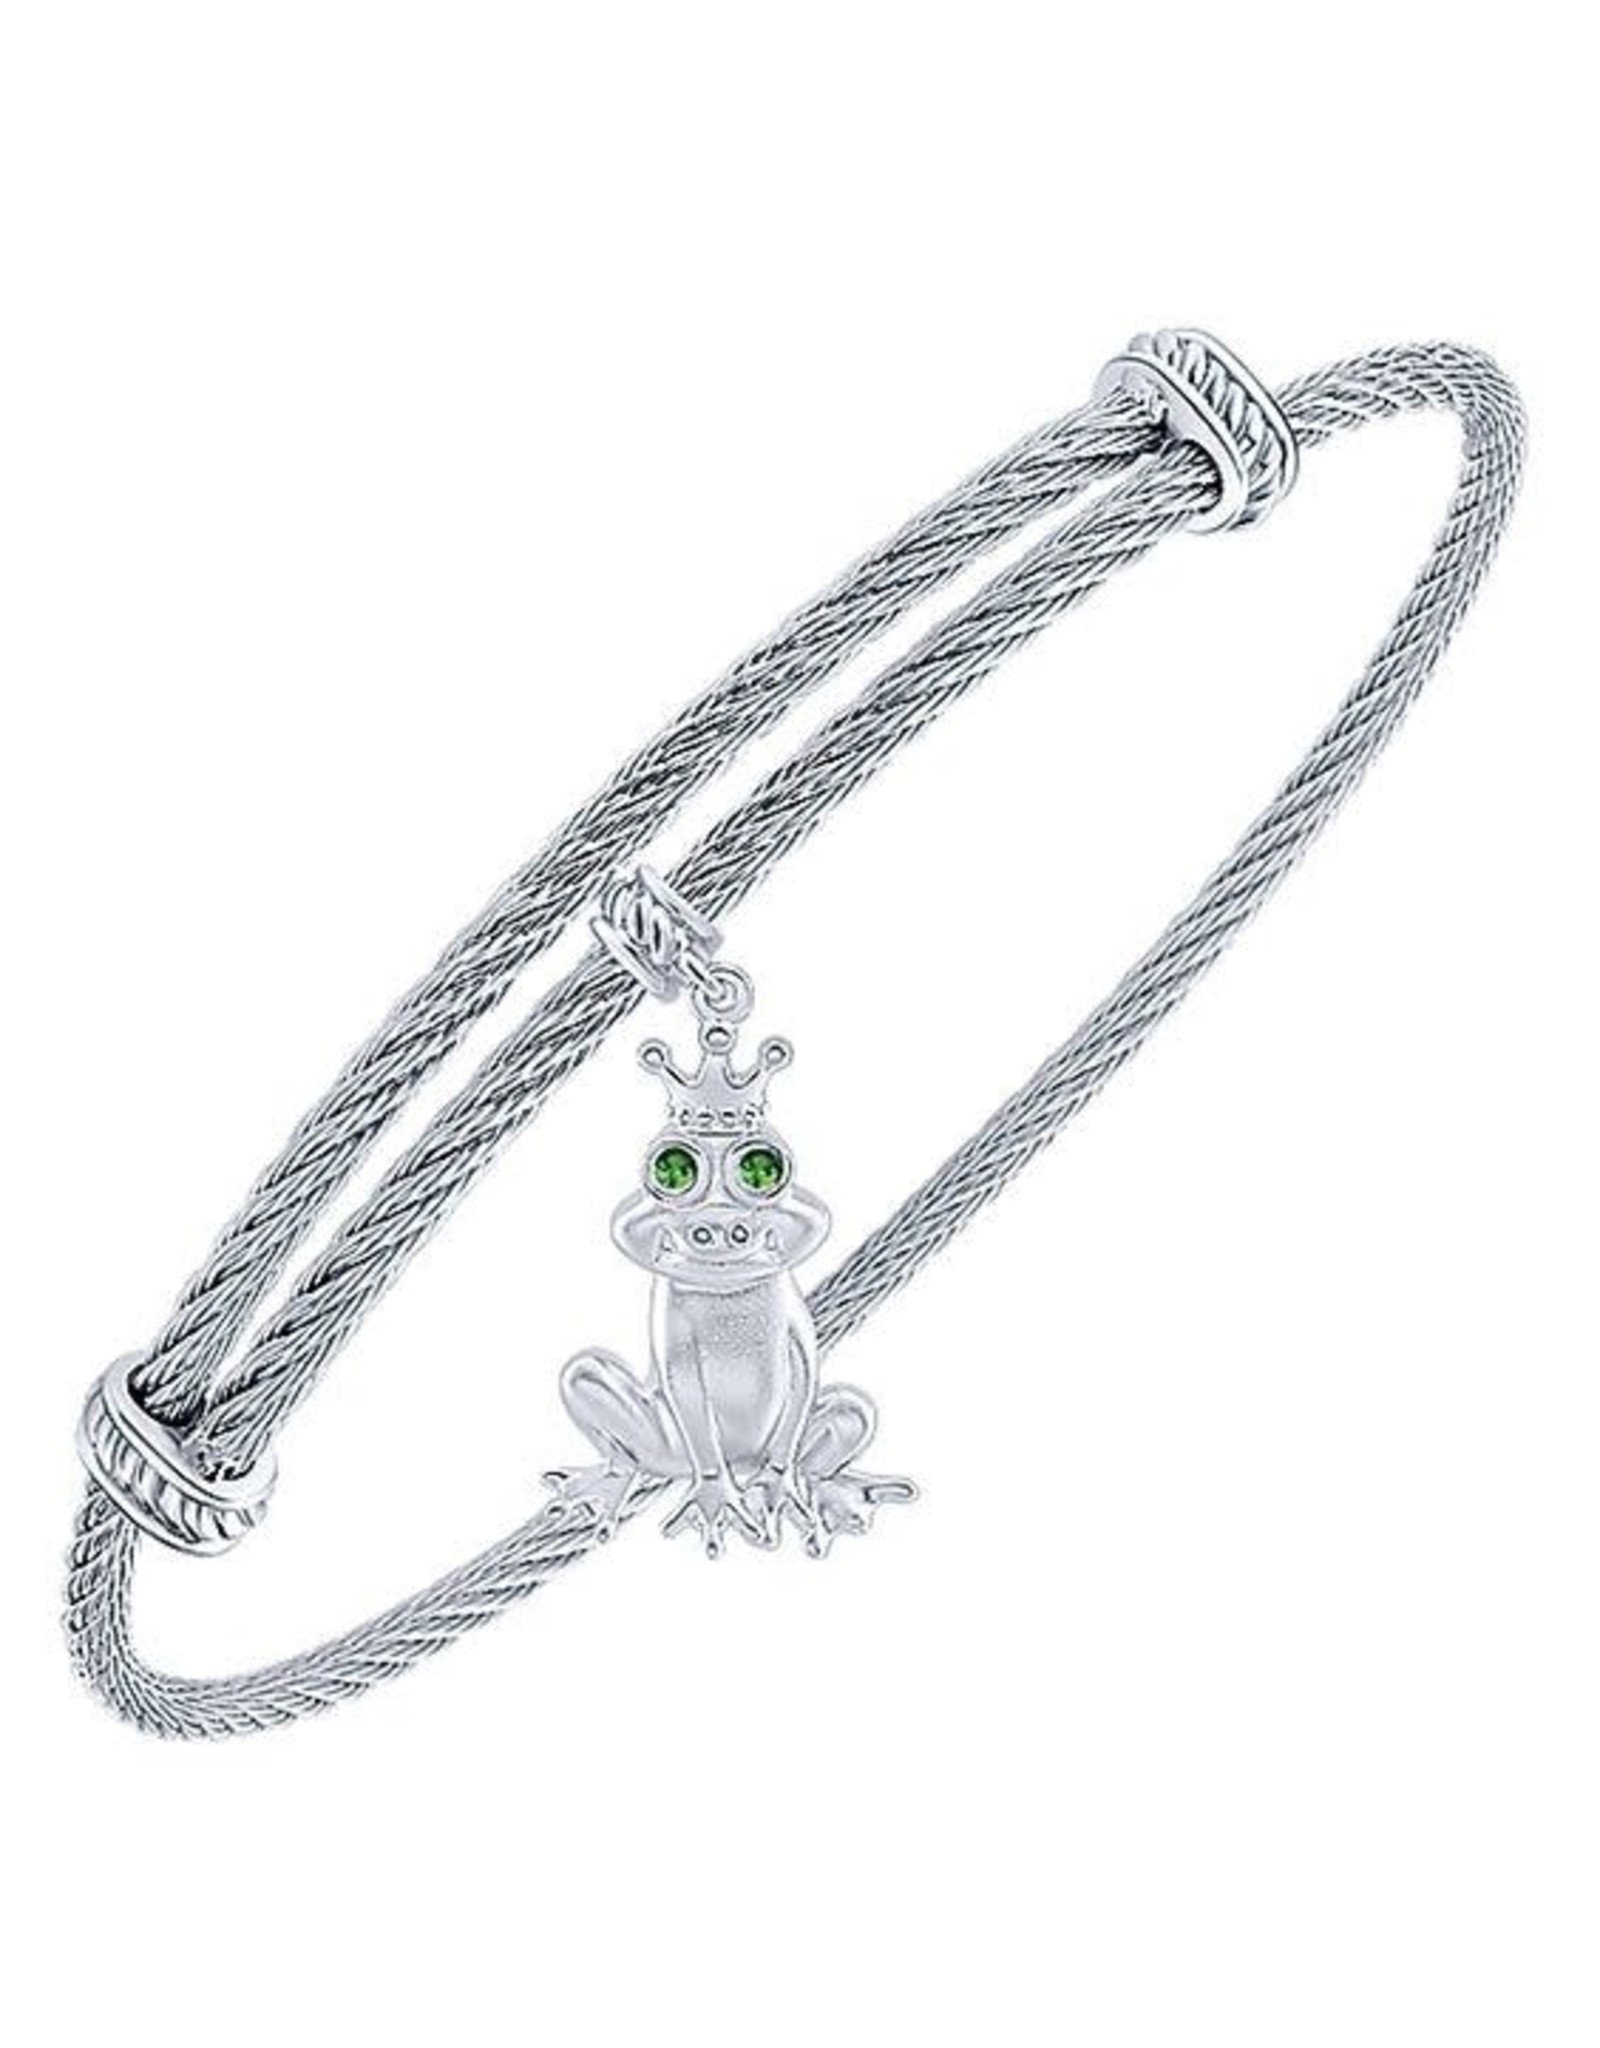 Twisted Cable Stainless Steel Bangle with Sterling Silver Emerald Eye Prince Charming Frog Charm